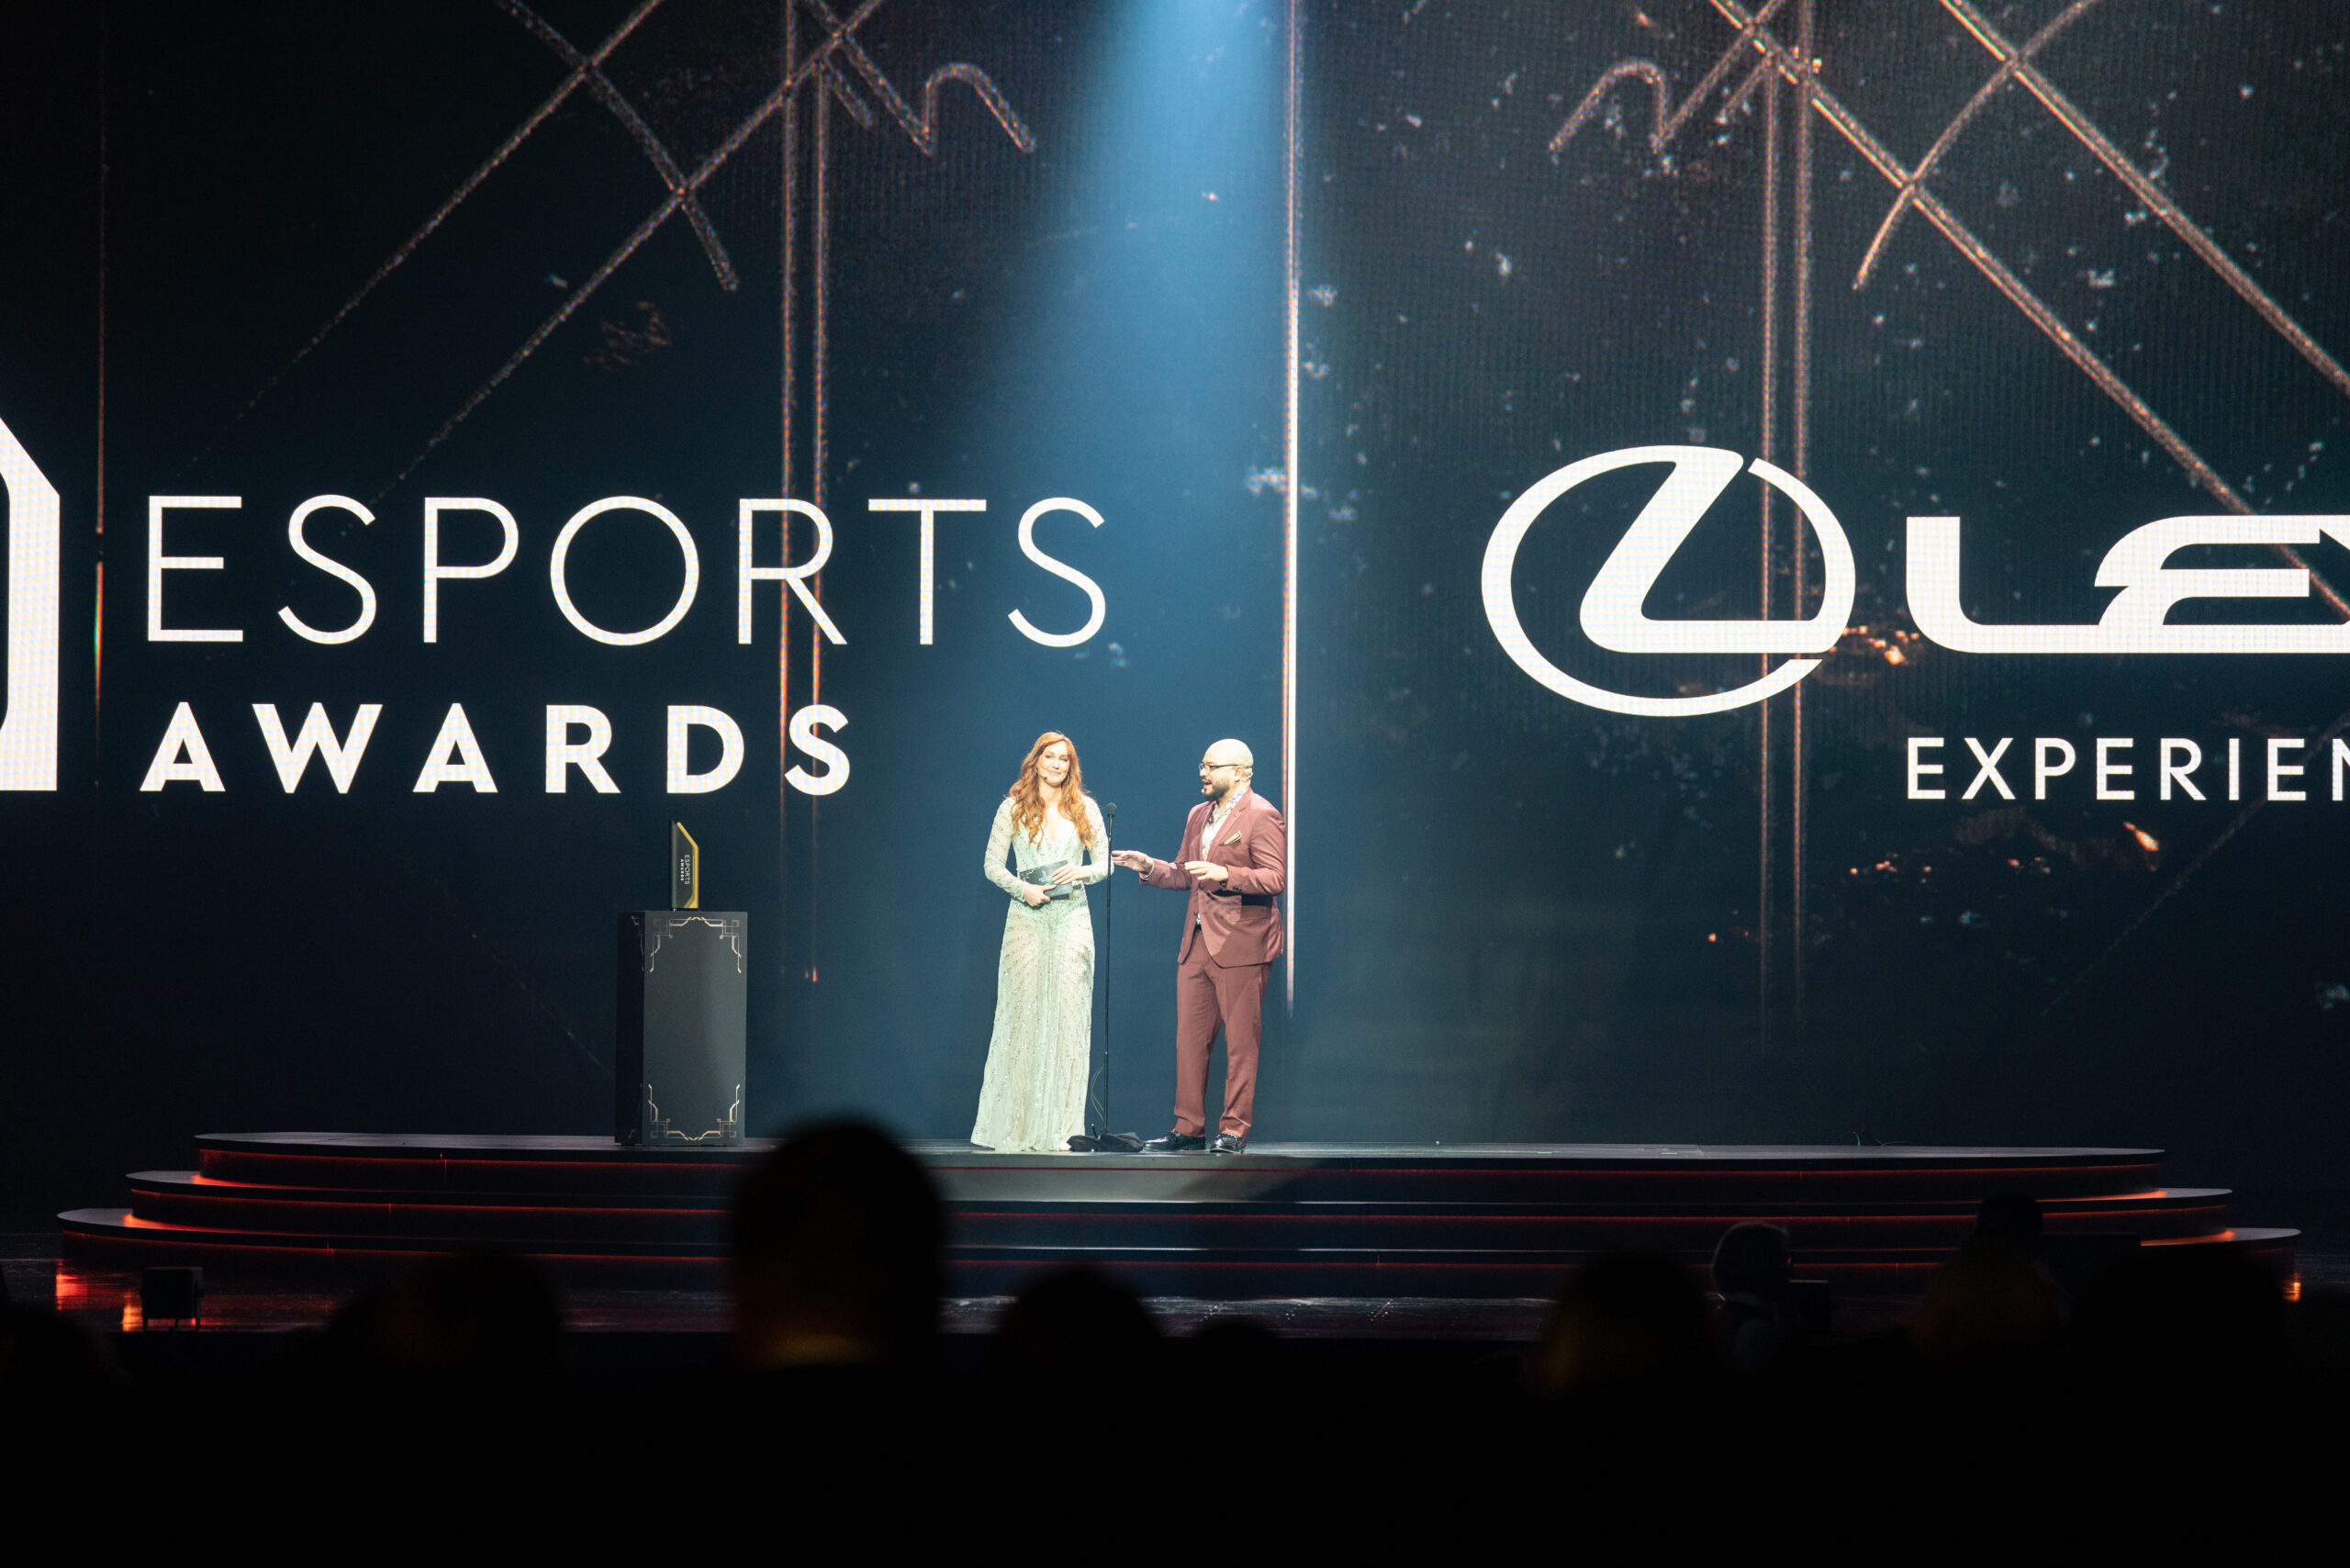 All award winners for the Game Awards 2022 by category - Dot Esports